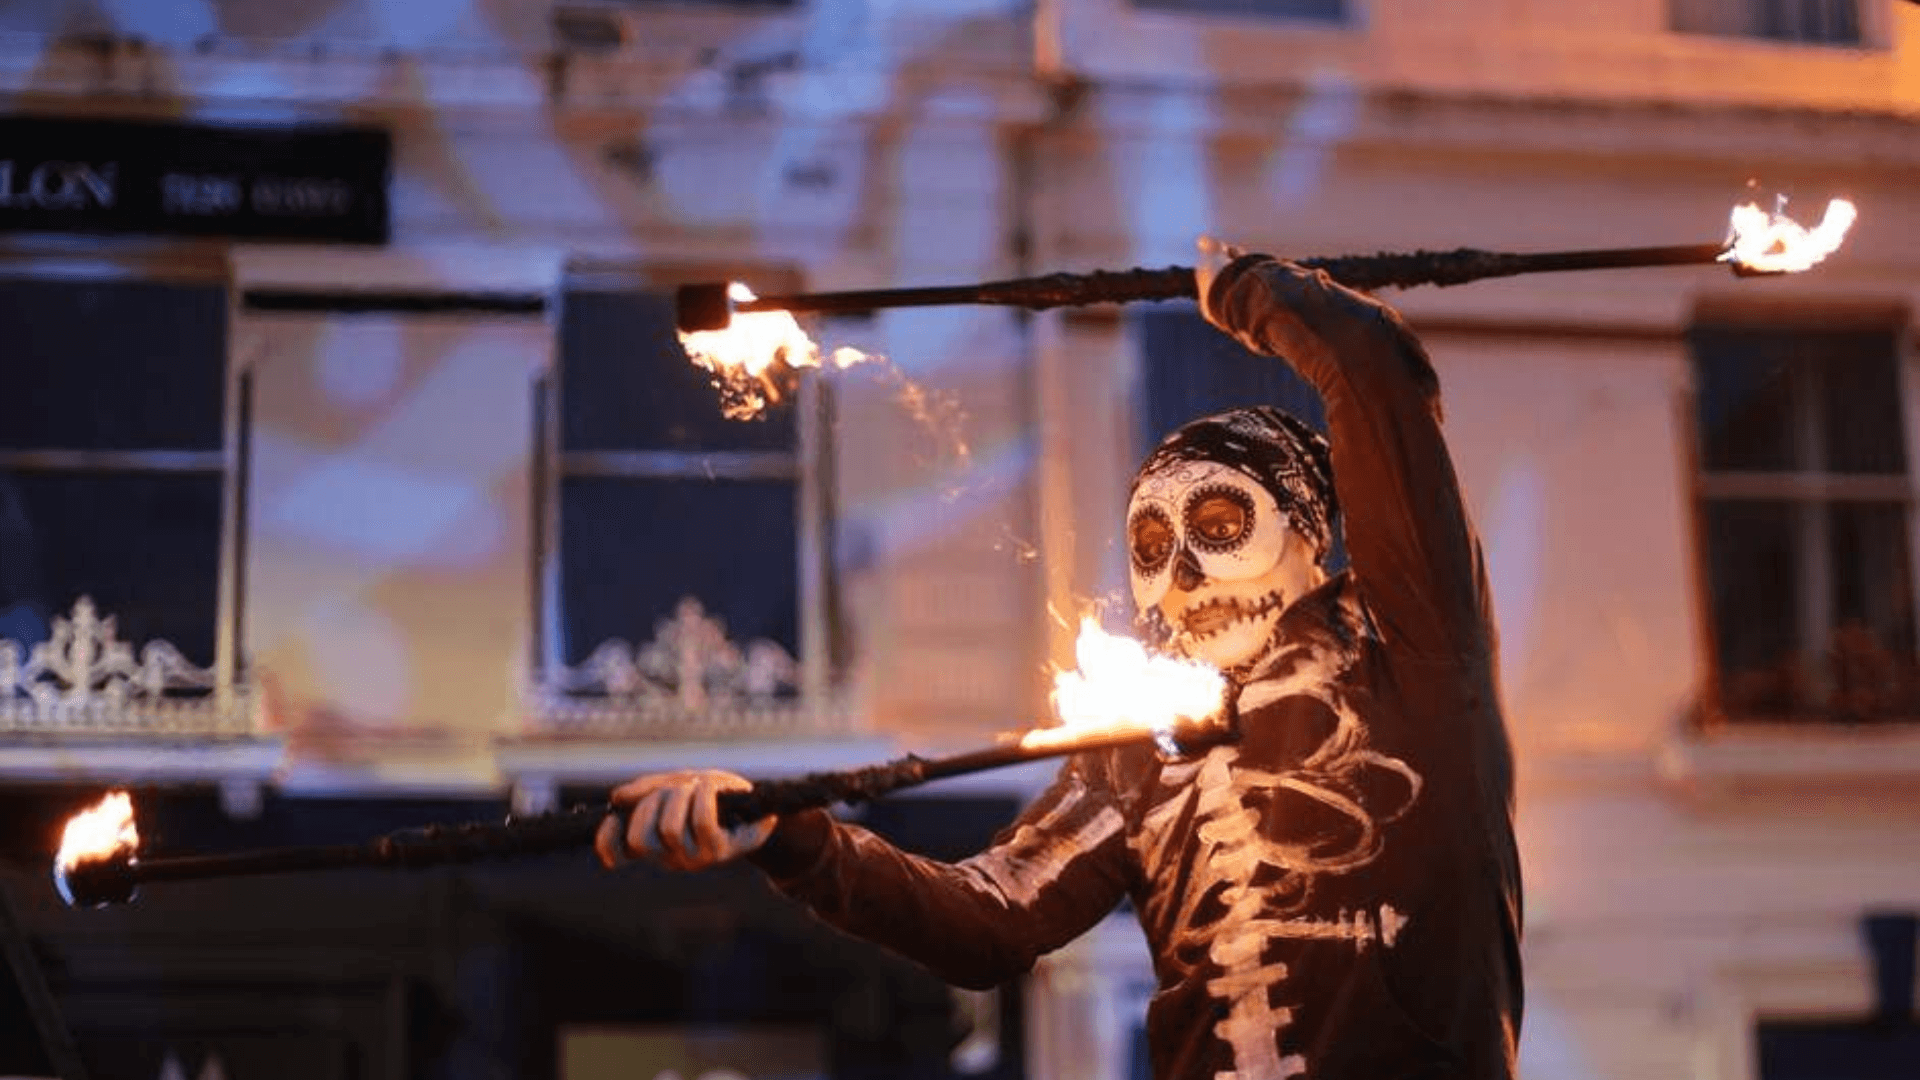 A Halloween Festival at the Walled City of Derry